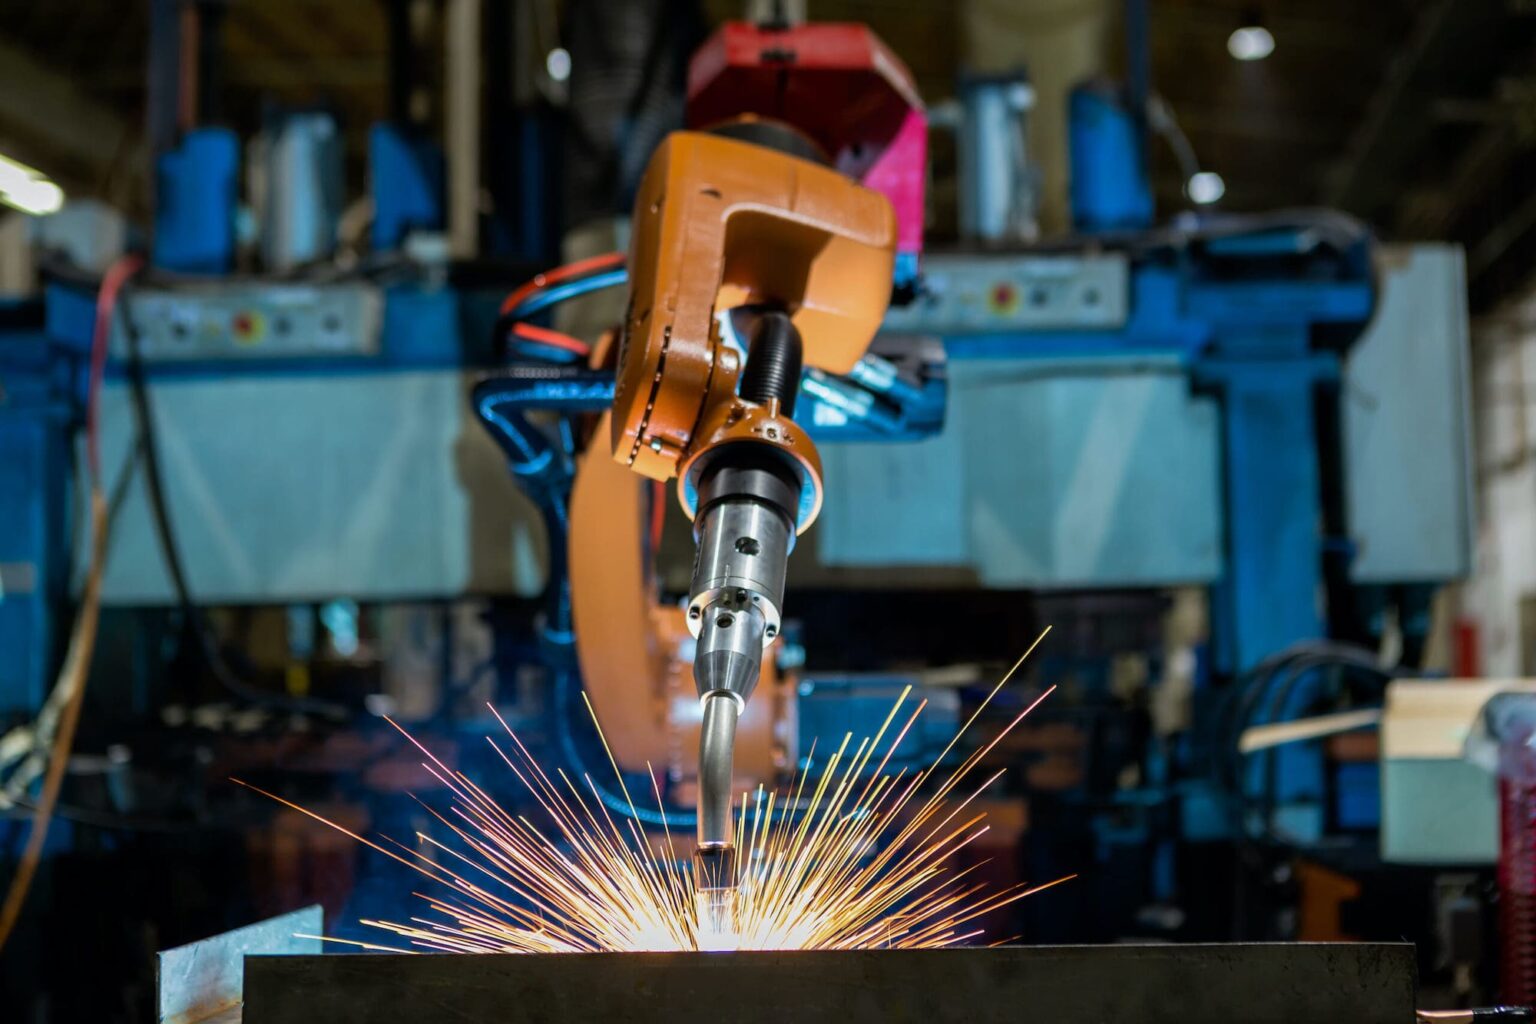 Is the future of manufacturing technology really robotic welding? Read a review of the latest tech to get an inside scoop on the industry right here.